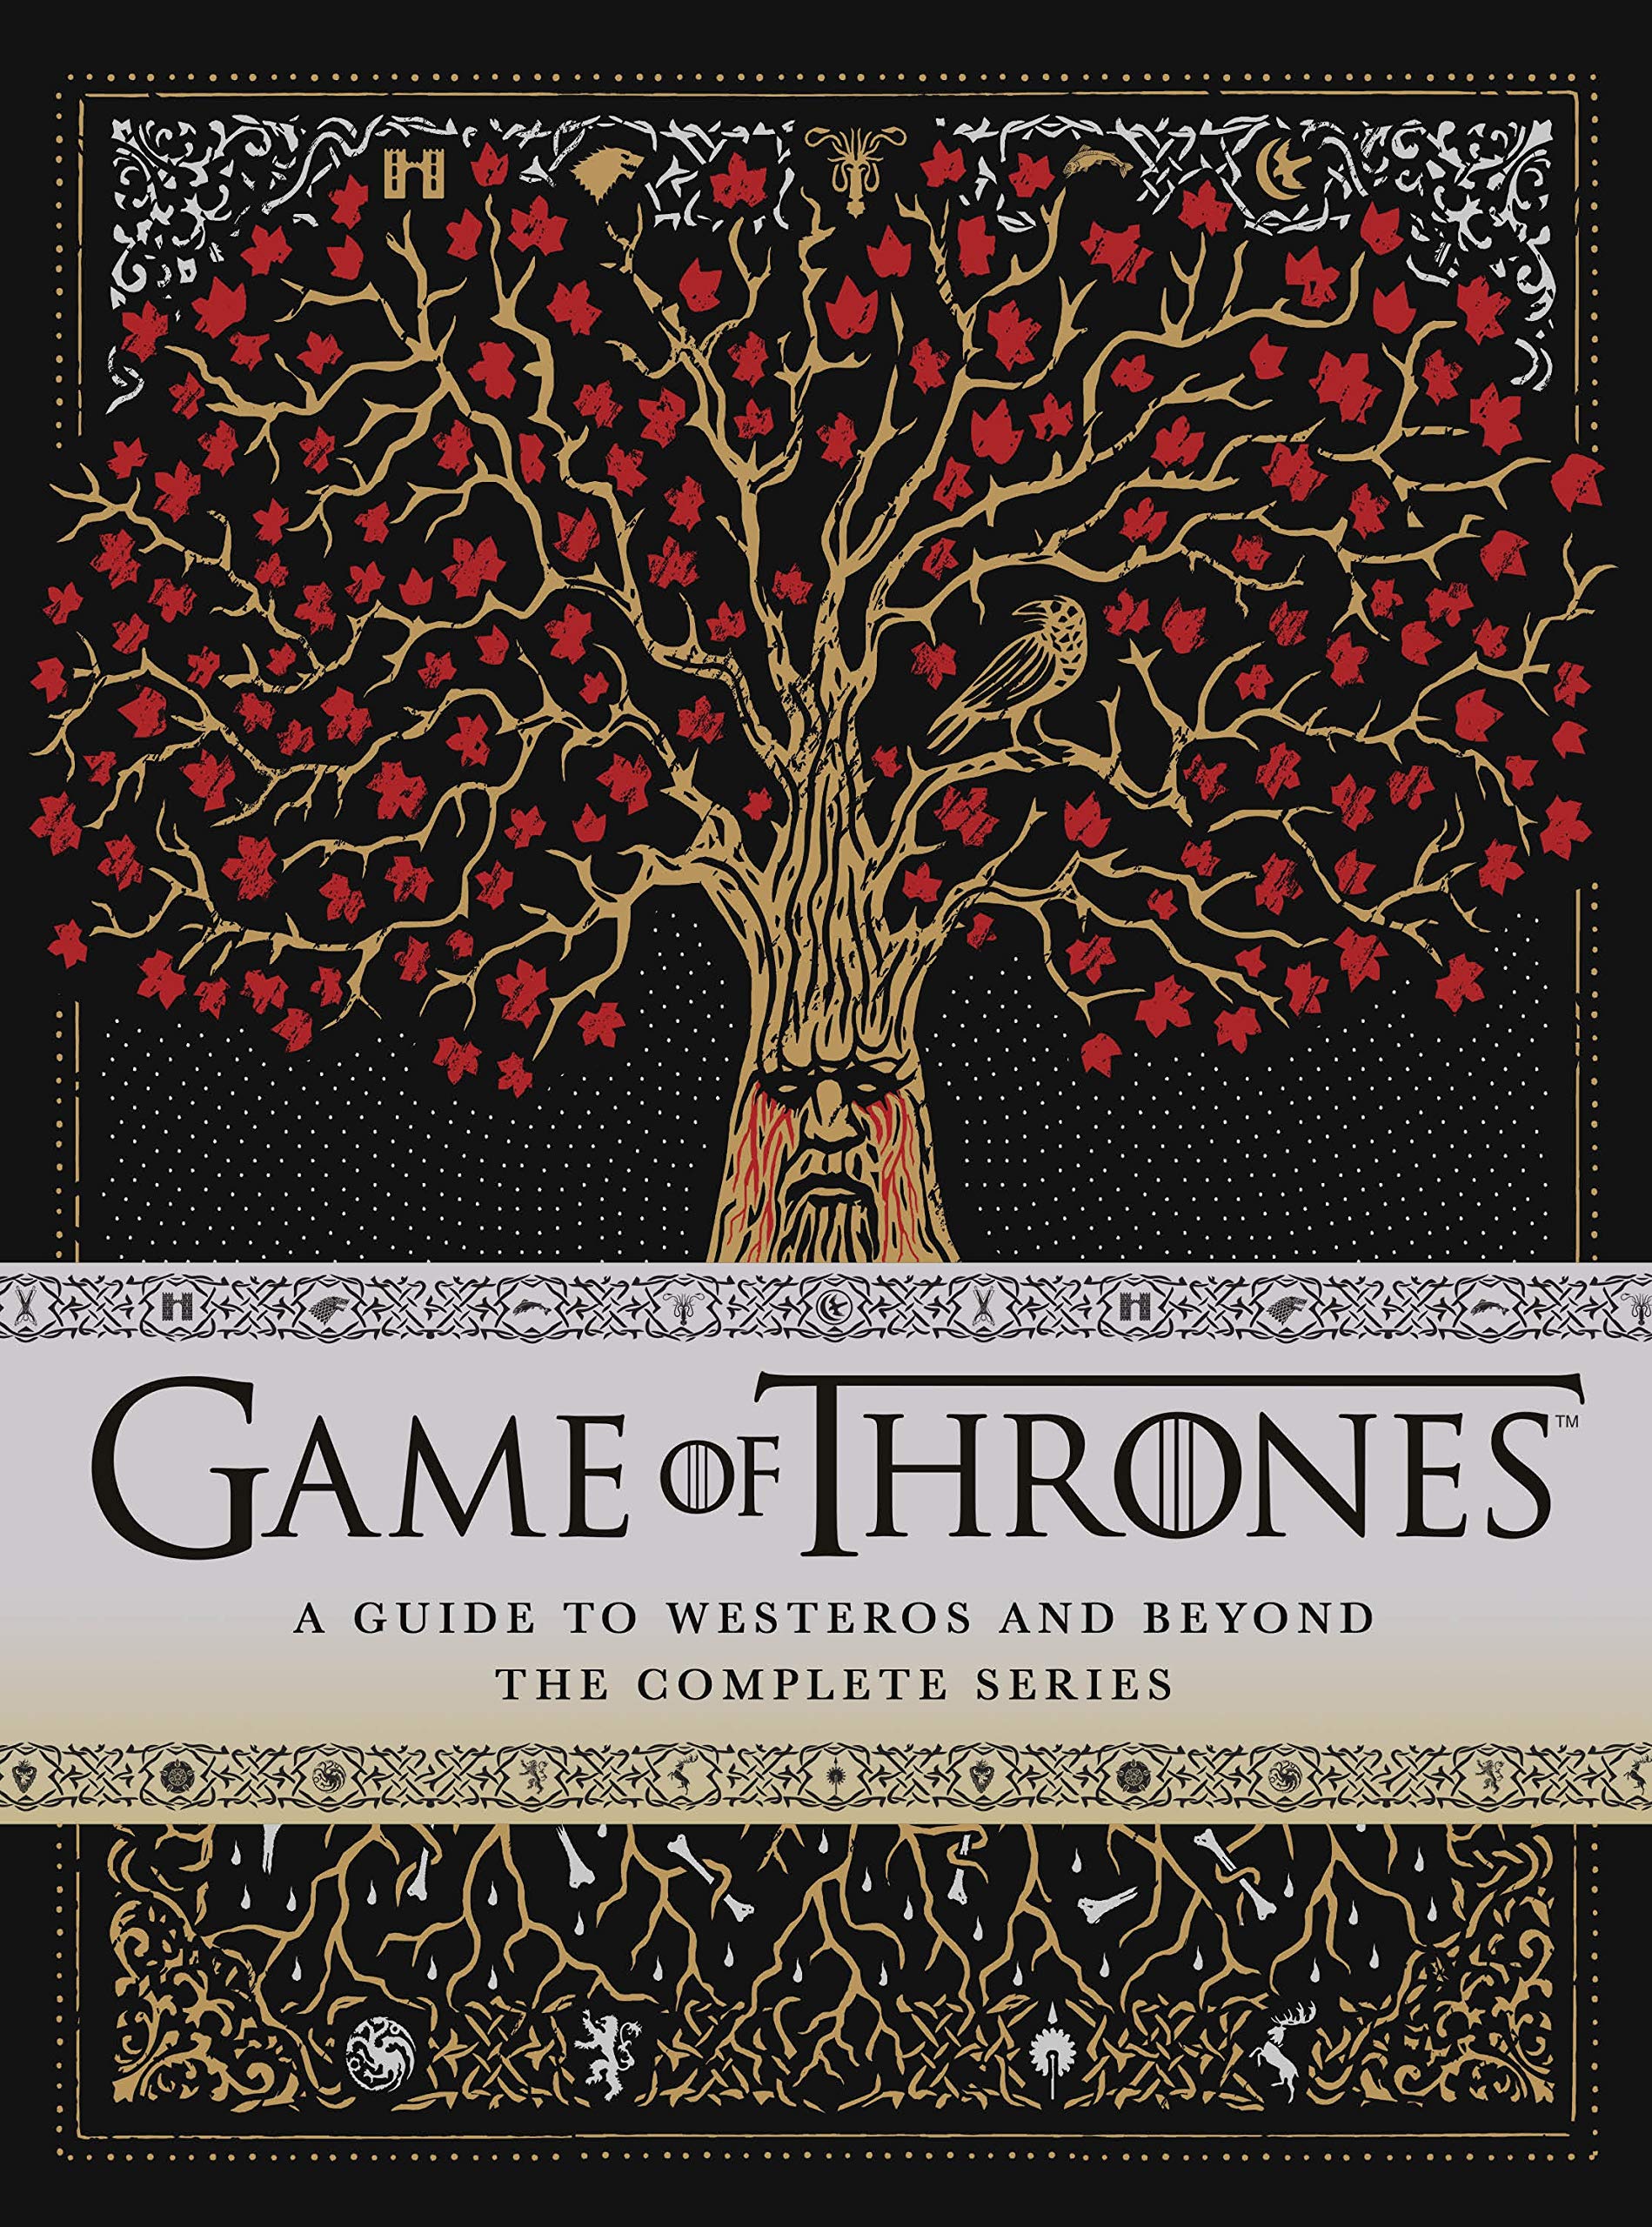 Game of Thrones: A Guide to Westeros and Beyond - The Complete Series